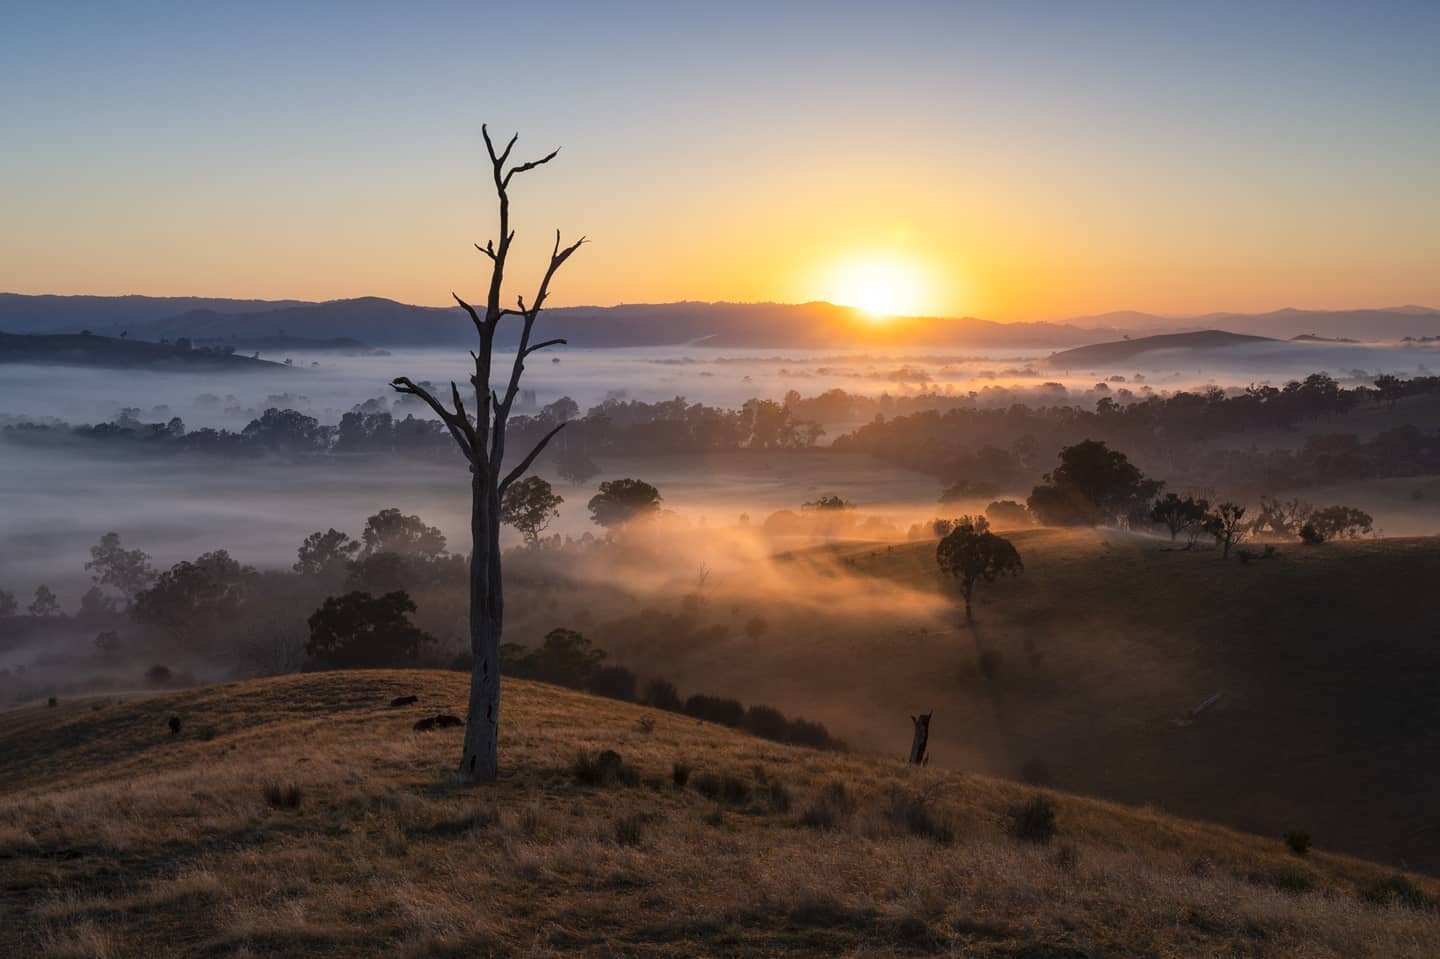 A few more shots of that stunning foggy sunrise over the Easter long weekend at the Acheron Cutting. Love shooting foggy sunrises here as the fog lights up from the sun's first rays 😍 Can you see the boxing kangaroos in the last shot? 🦘🥊